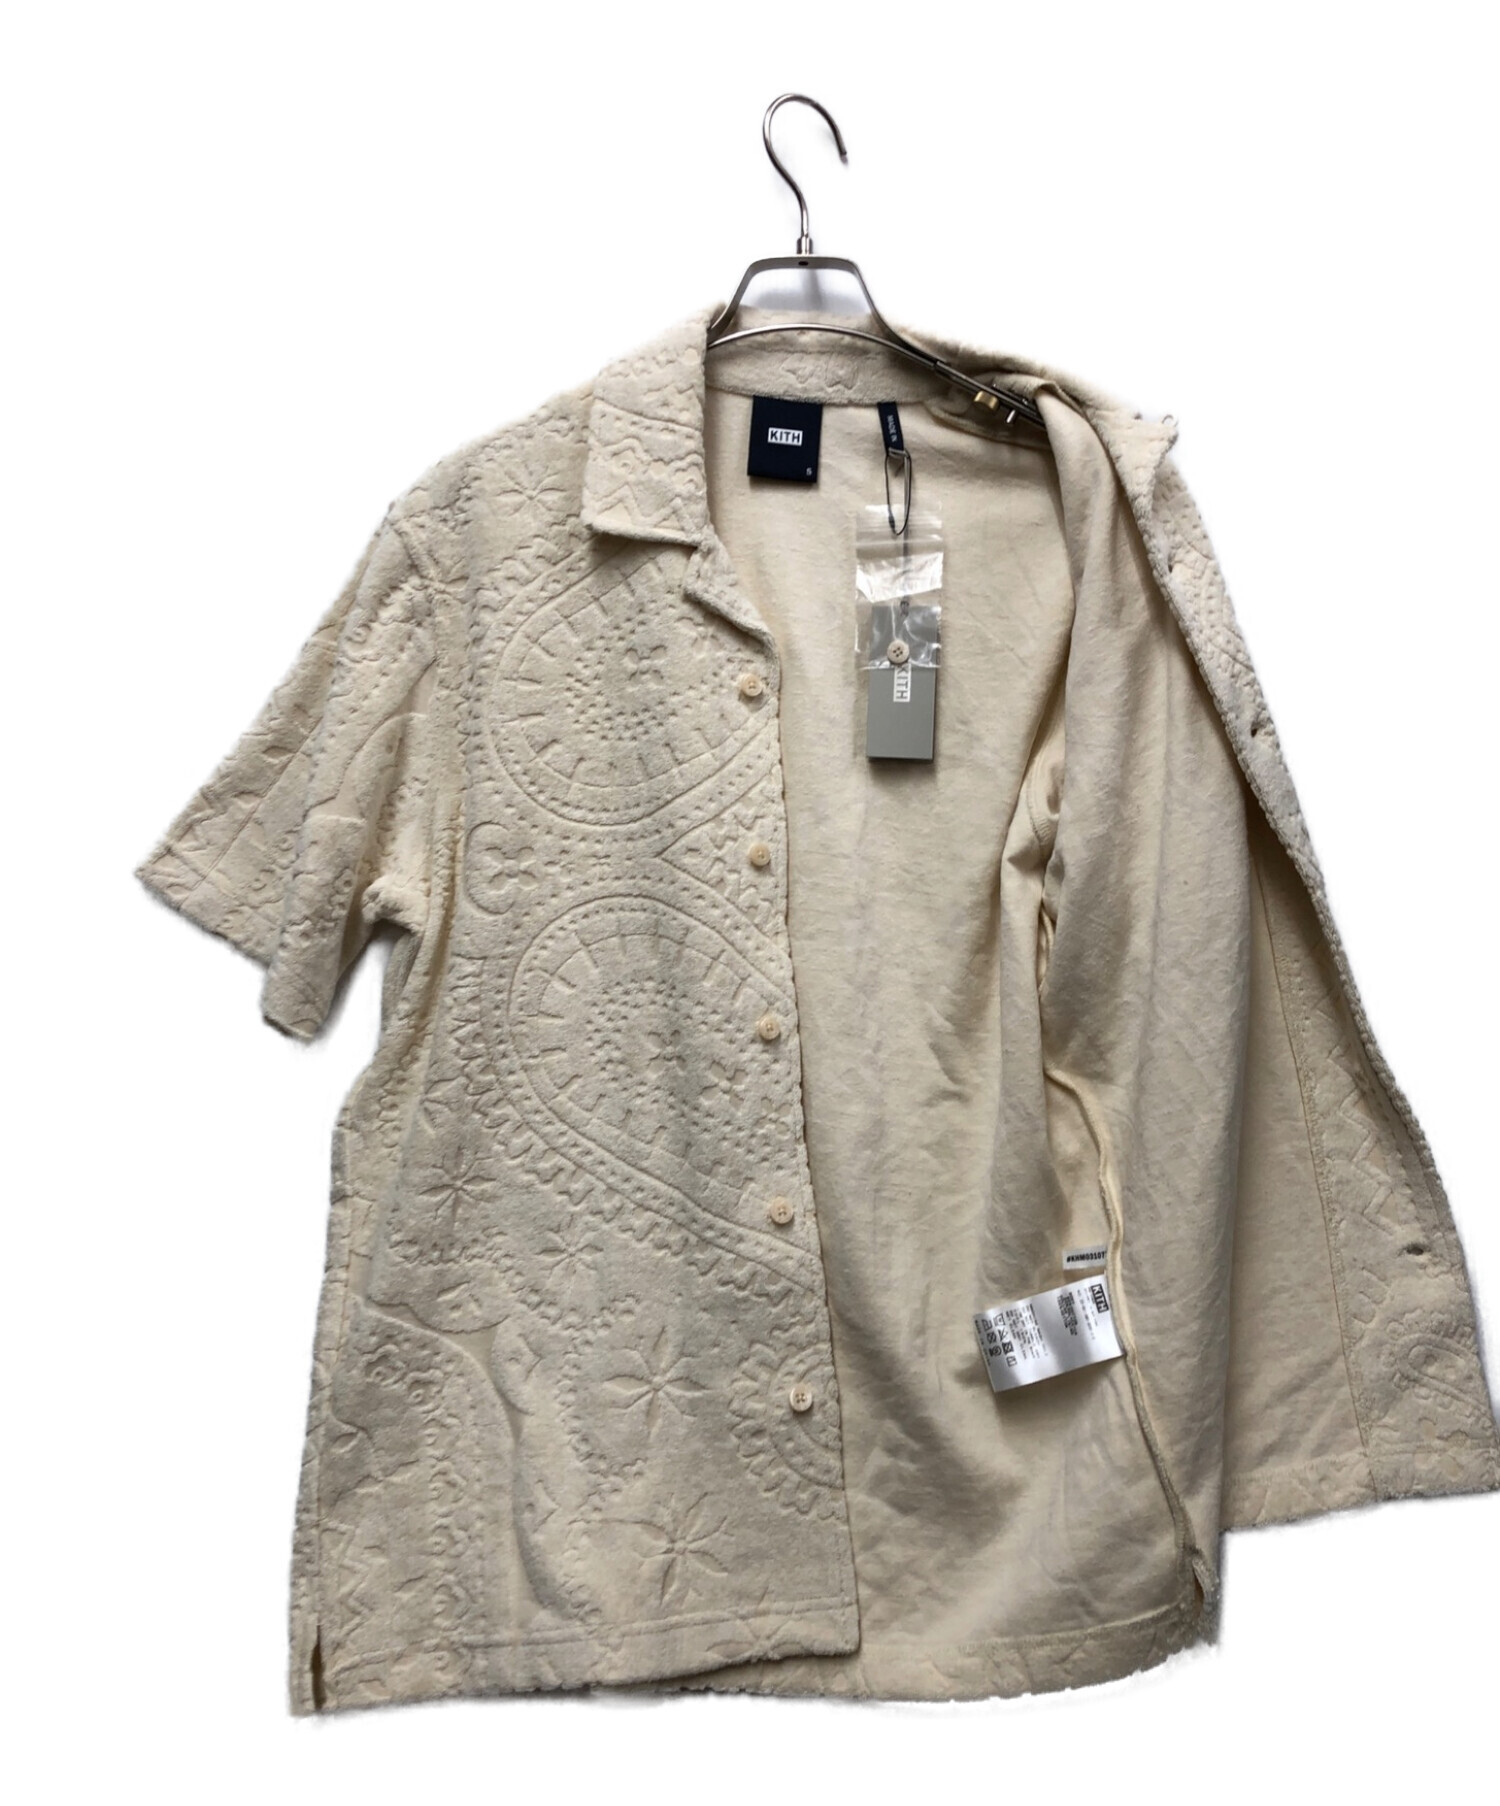 KITH NYC キスニューヨークシティ 22SS Printed L/S Thompson Camp ...